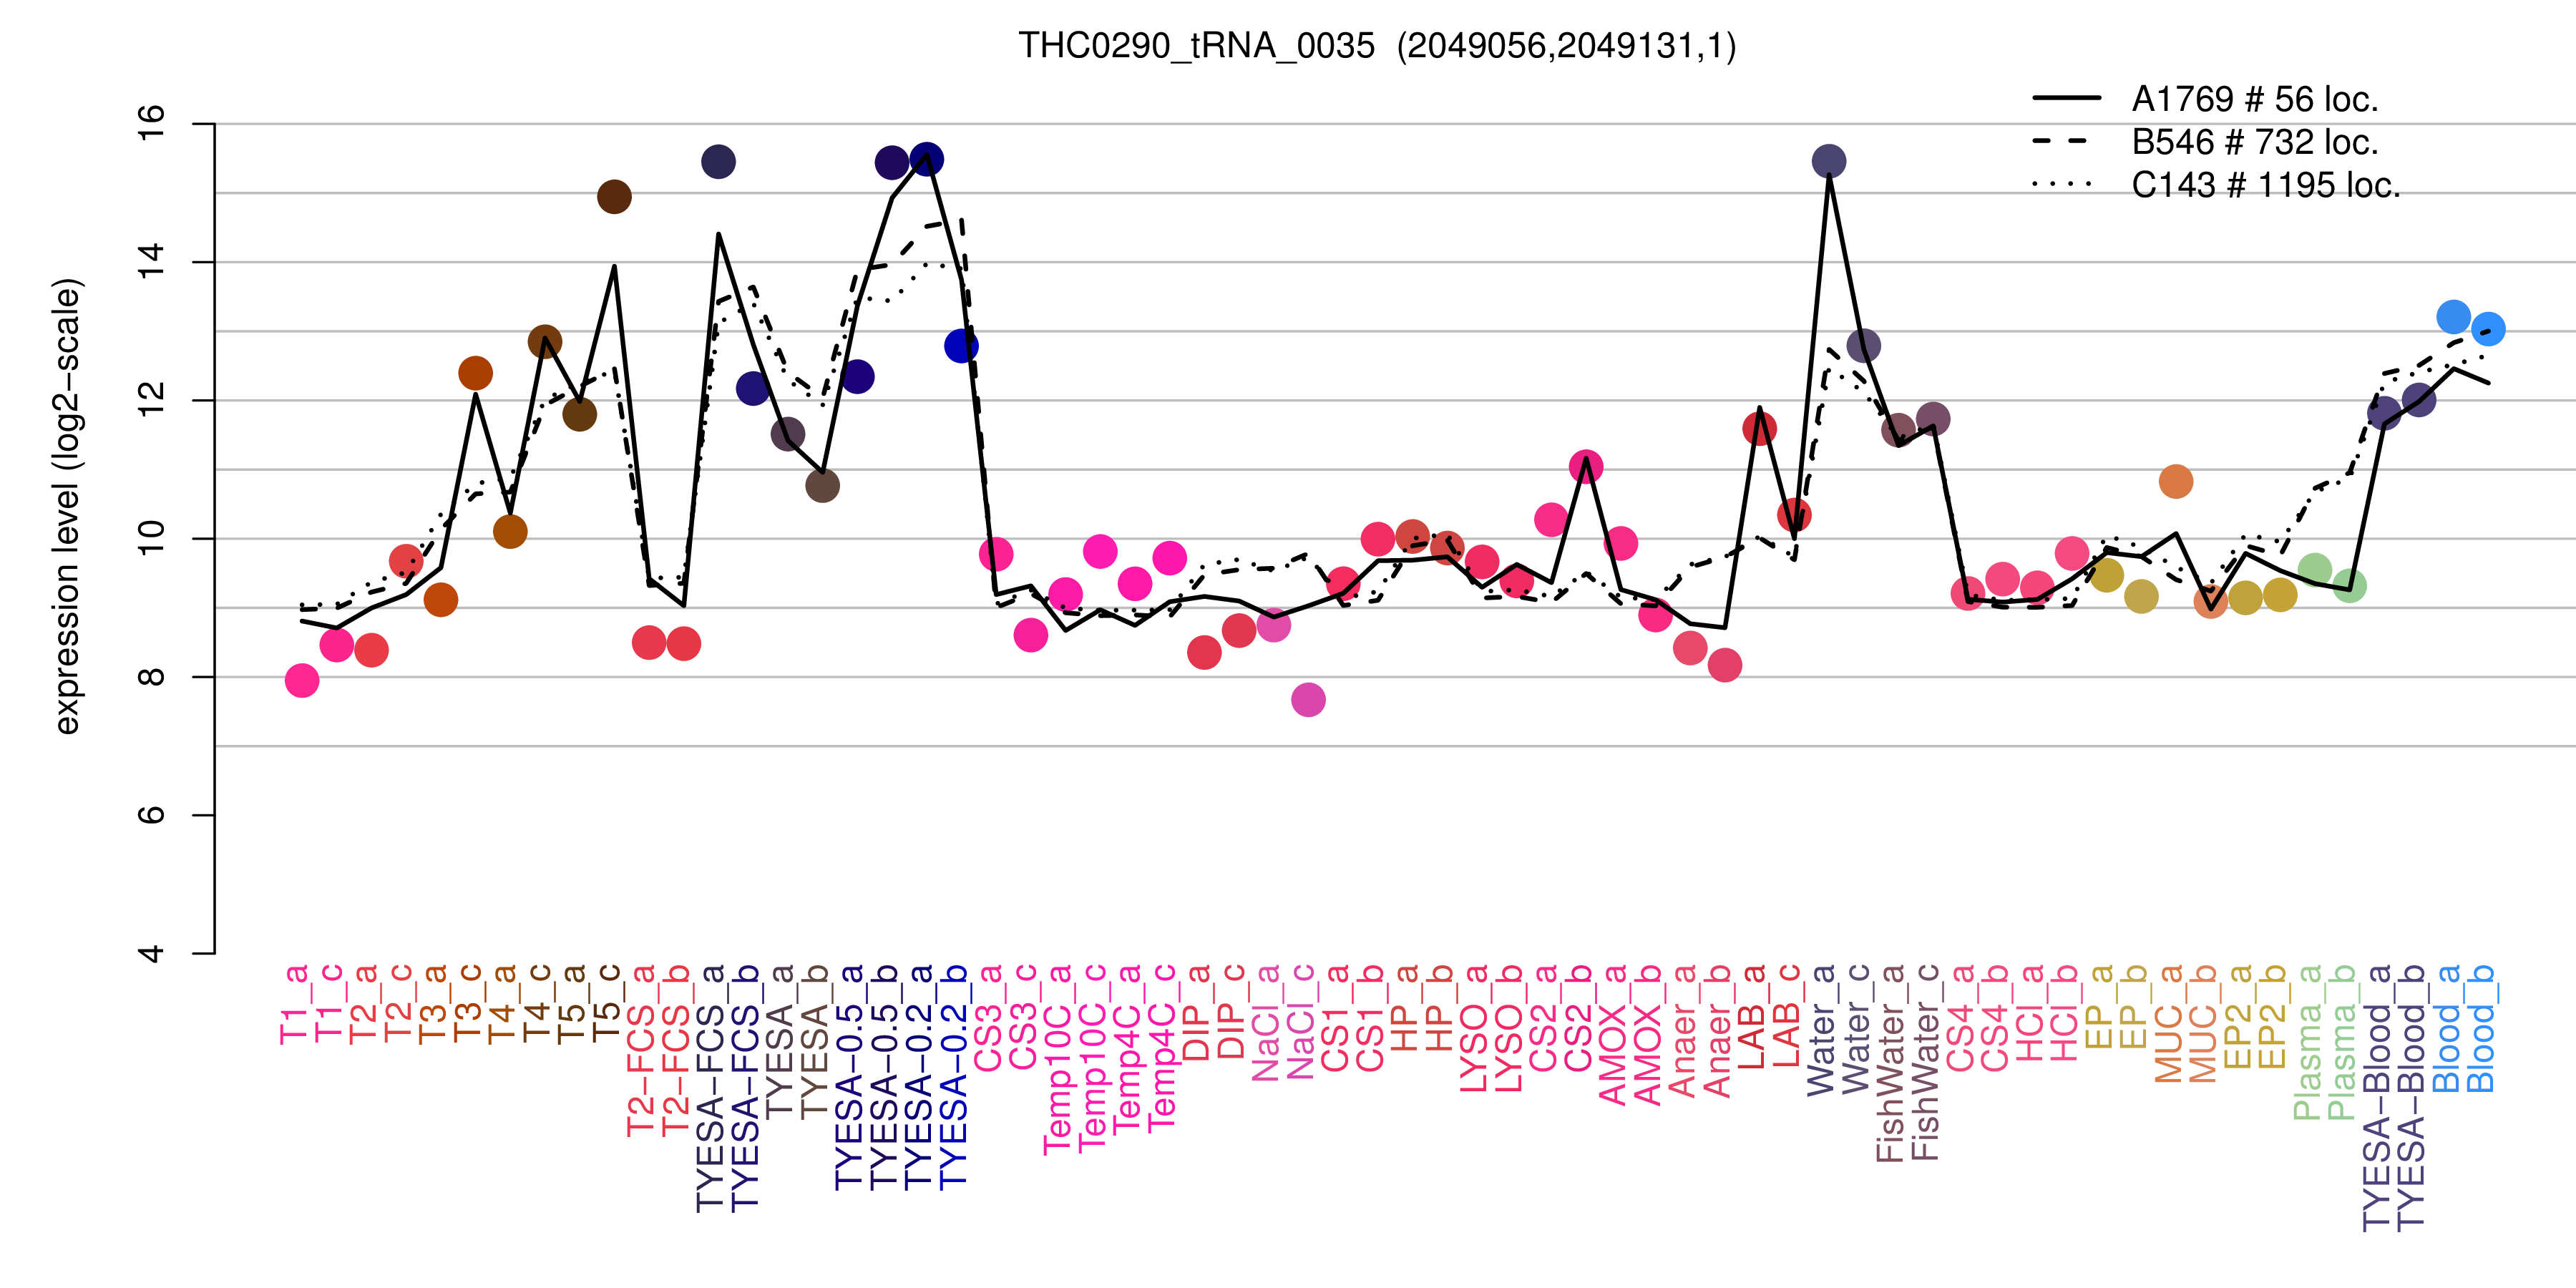 THC0290_tRNA_0035 expression levels among conditions